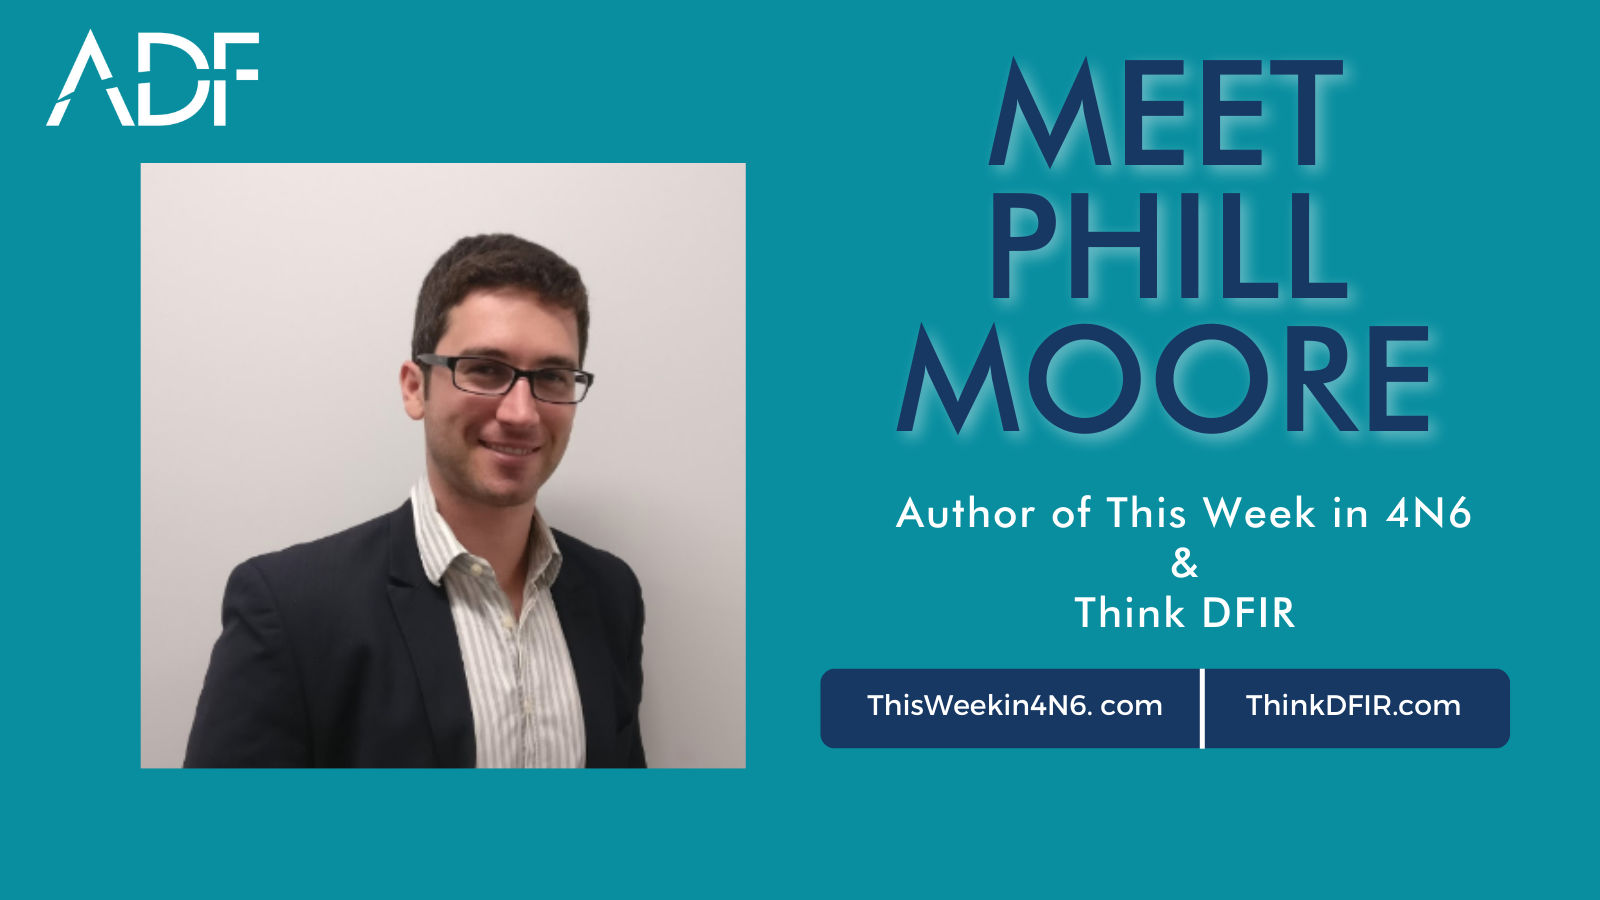 Meet Phill Moore Author of This Week in 4N6 and Think DFIR